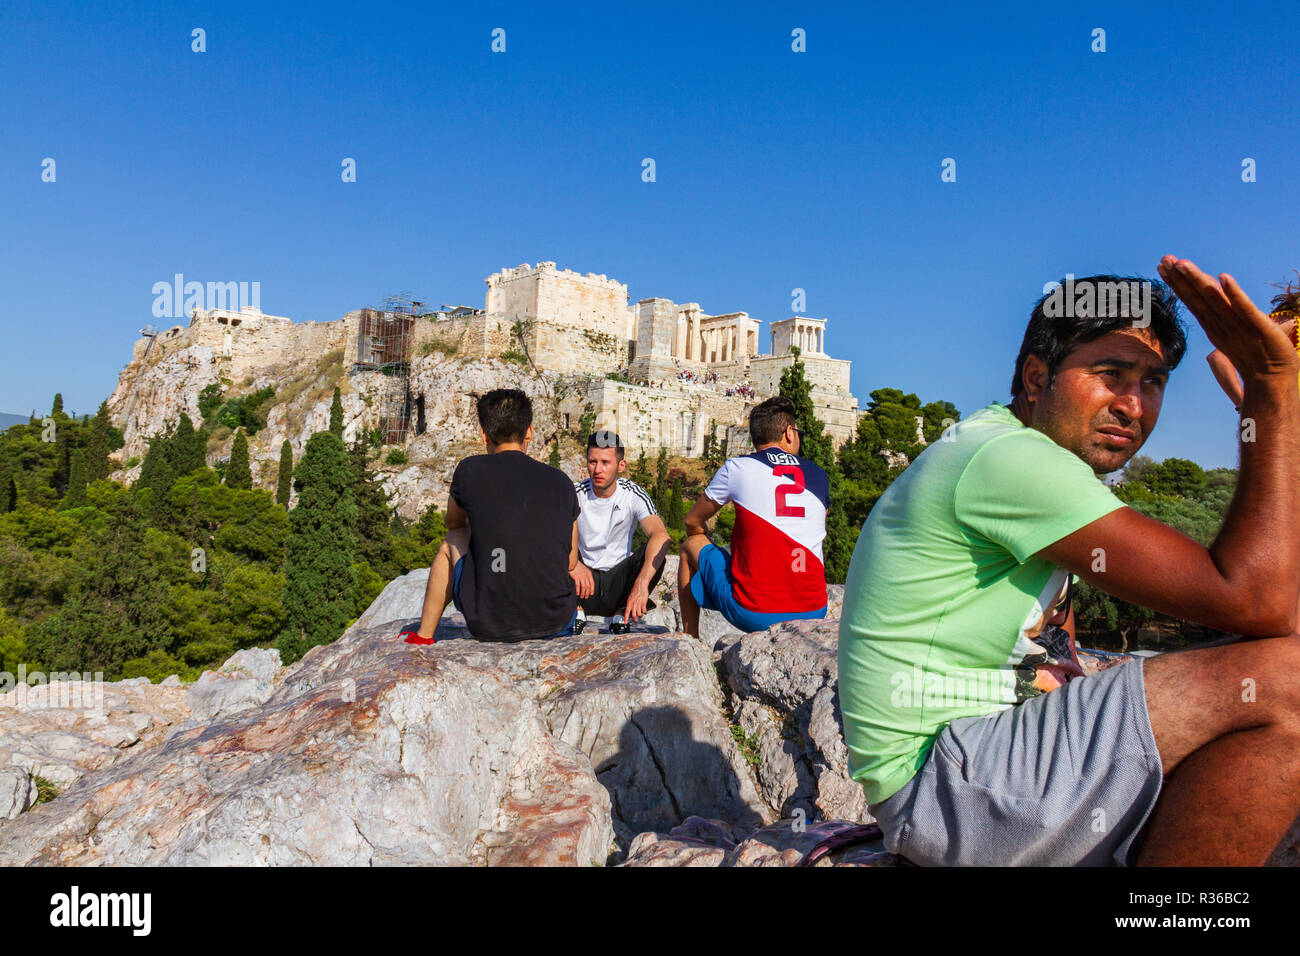 Athens, Greece - June 9, 2018: People seated on a rock and chatting against the Acropoilis ruins in Athens, Greece on a summer afternoon Stock Photo